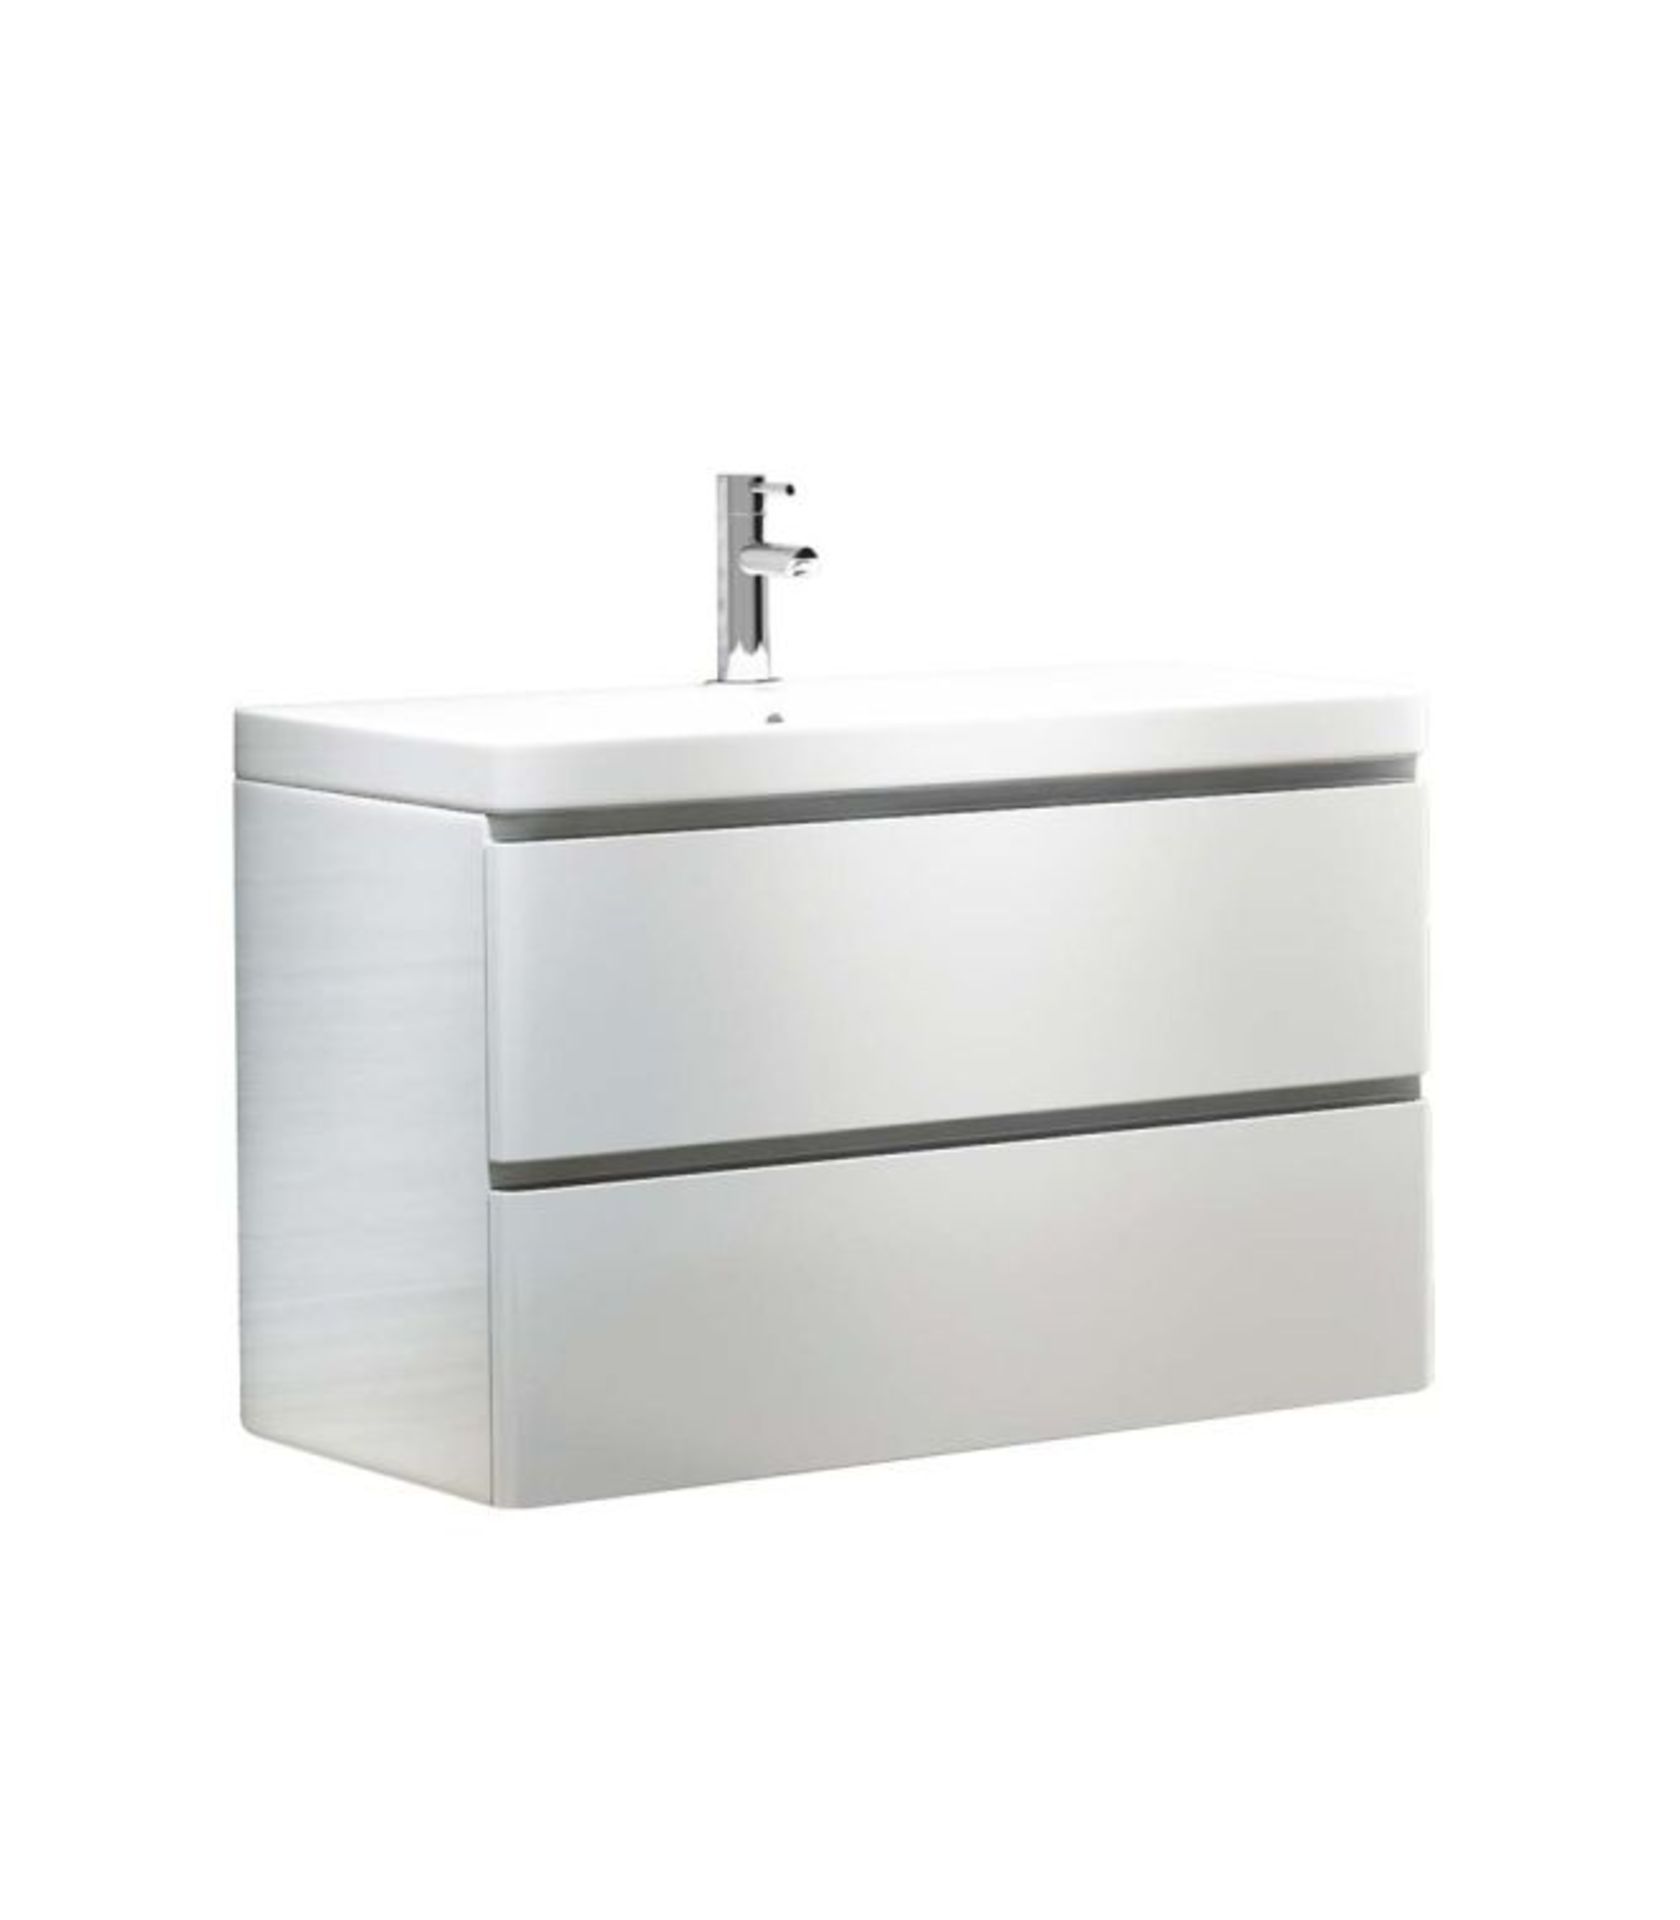 1 x Synergy Linea 800mm Wall Mounted Vanity Unit With White Ceramic 1 Tap Hole Sink Basin - RRP £795 - Image 2 of 5